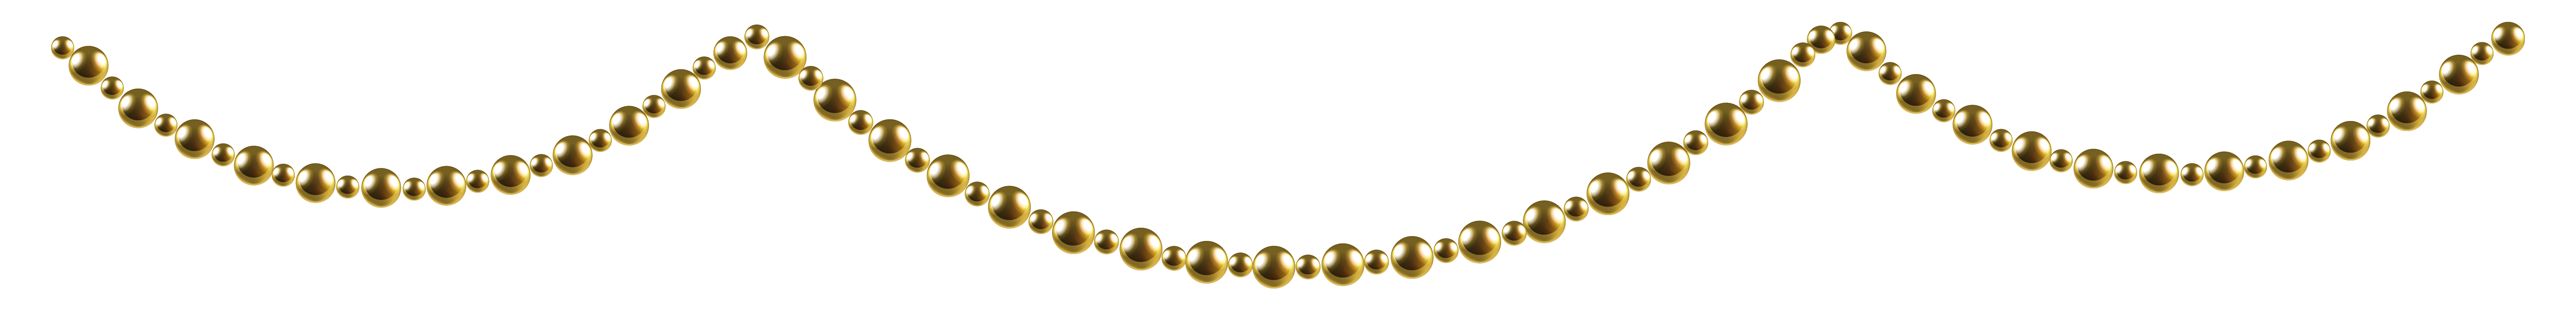 Pearl clipart gold bead. Garland png clip art